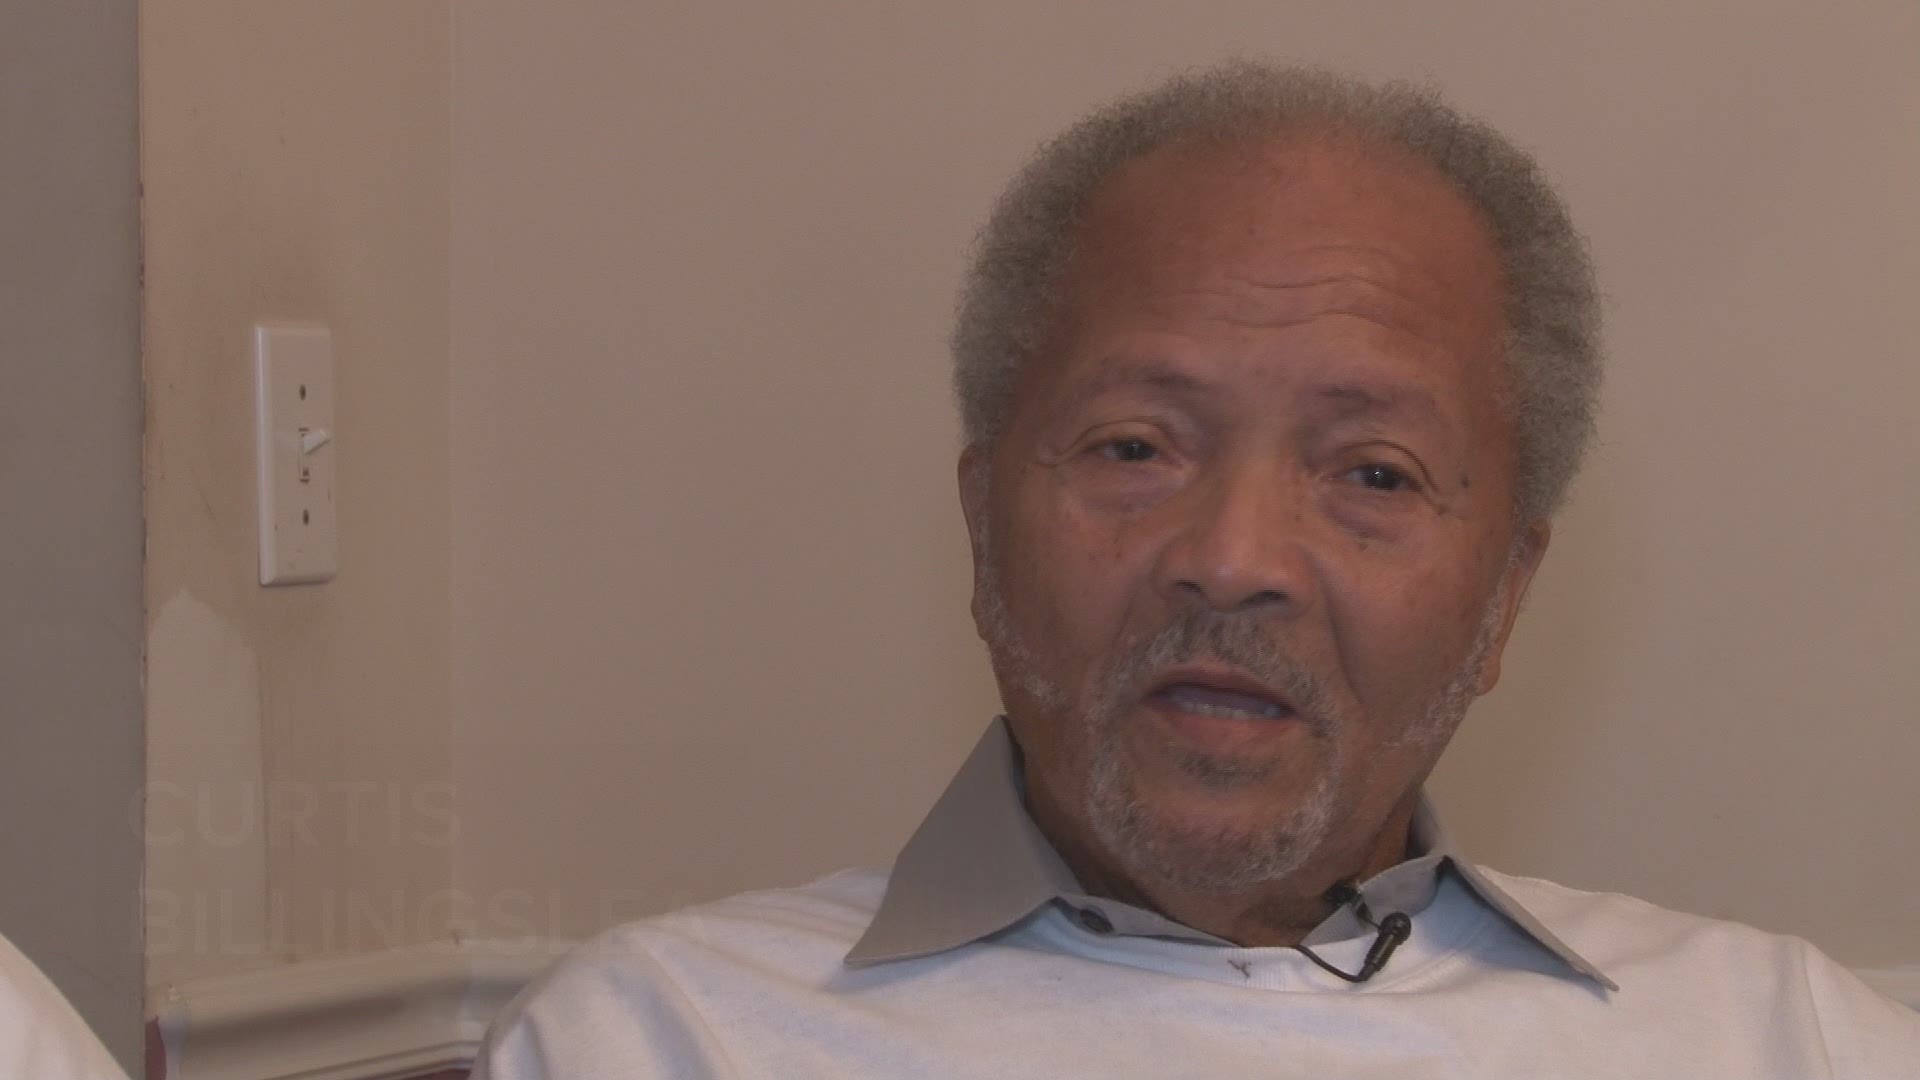 Curtis Billingslea is a relative of Alonzo Green, a man who was lynched in Jones County in the 1900s. Here he talks about who might have lynched his mother-in-law's uncle.